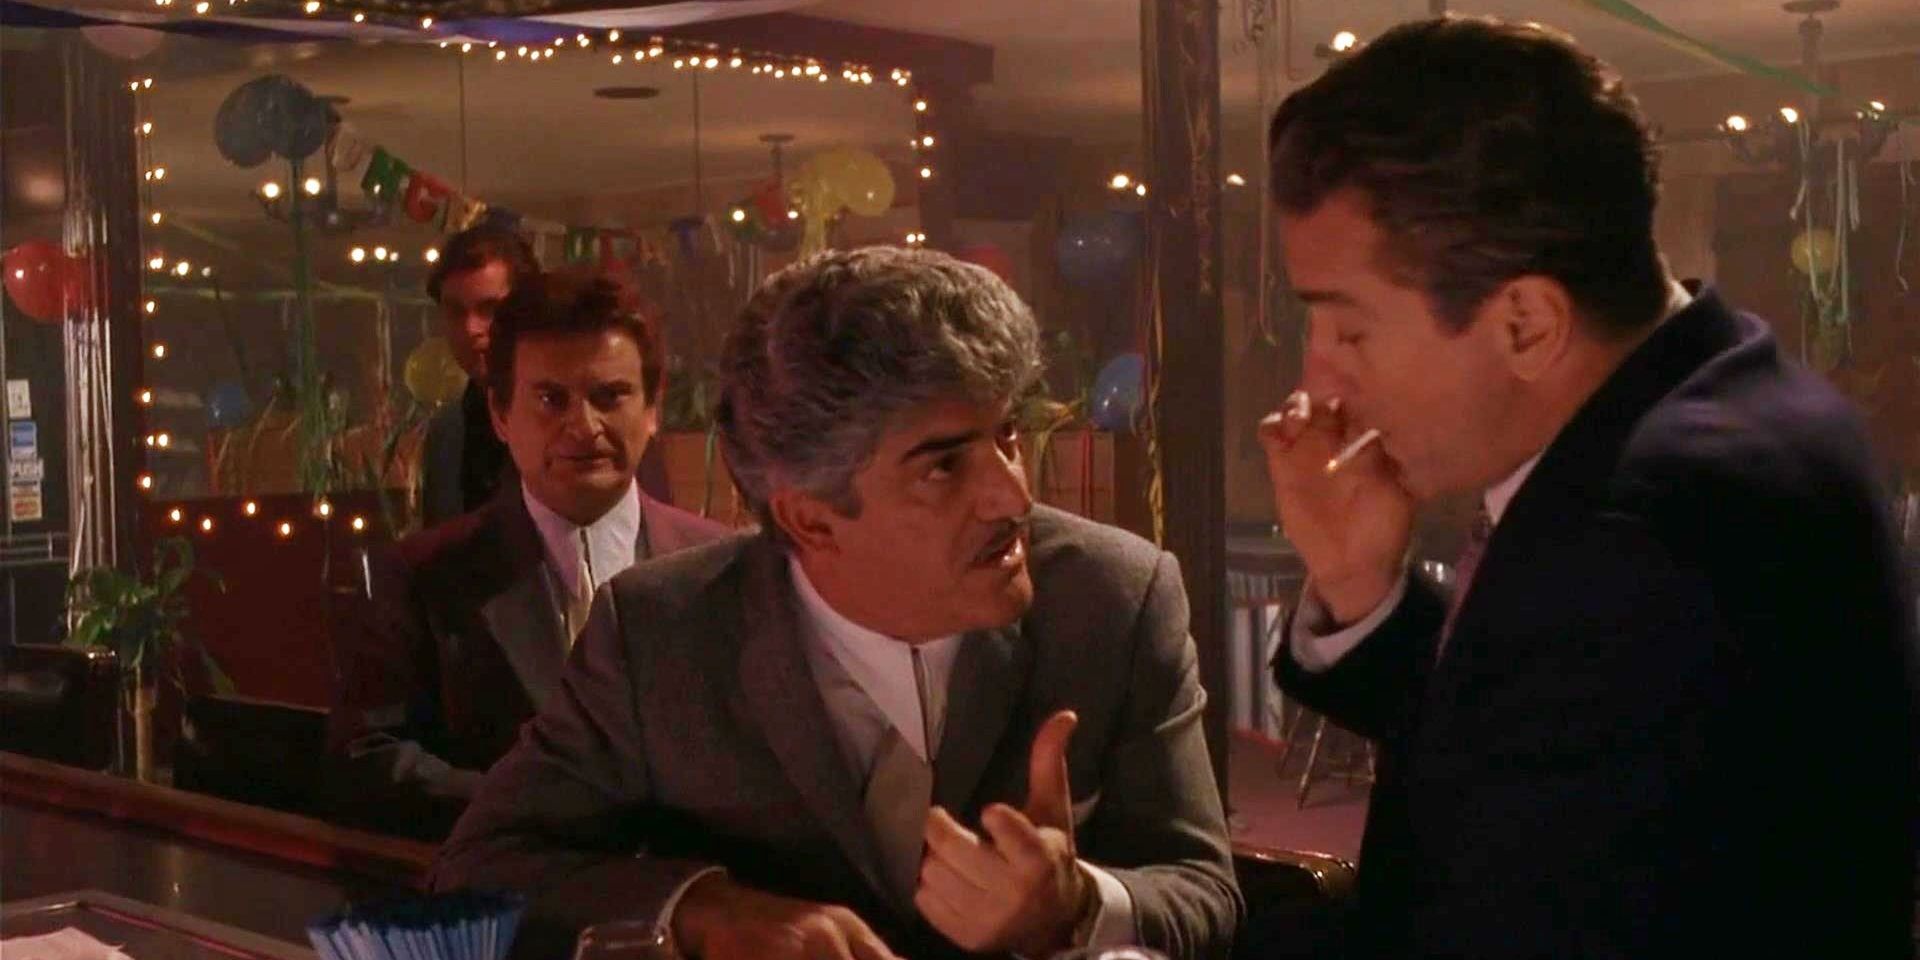 Martin Scorsese 5 Reasons Why Goodfellas Is His Best Crime Movie (& 5 Why Taxi Driver Is A Close Second)